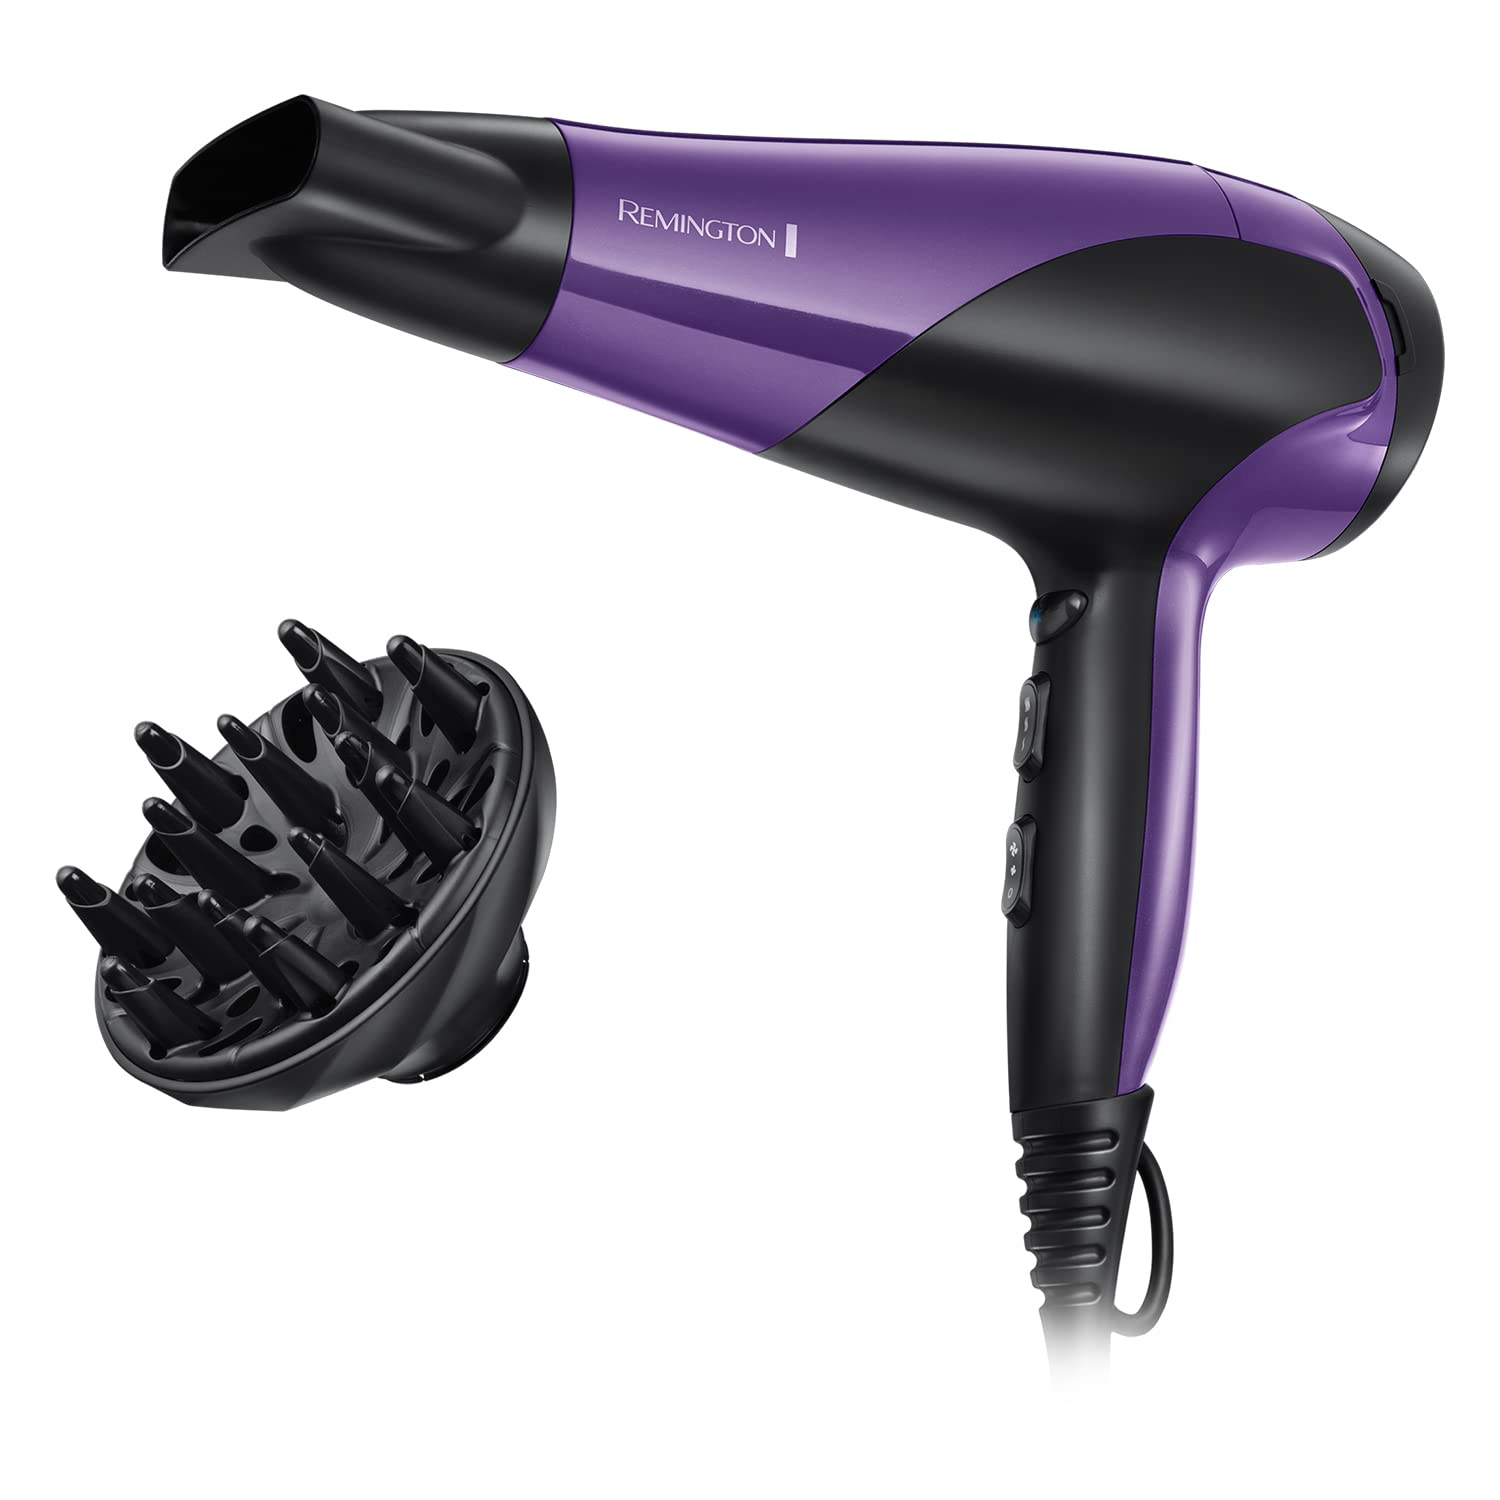 Remington D3190 Ionic Conditioning Hair Dryer for Frizz Free Styling with Diffuser and Concentrator Attachments, 2200 W, Purple